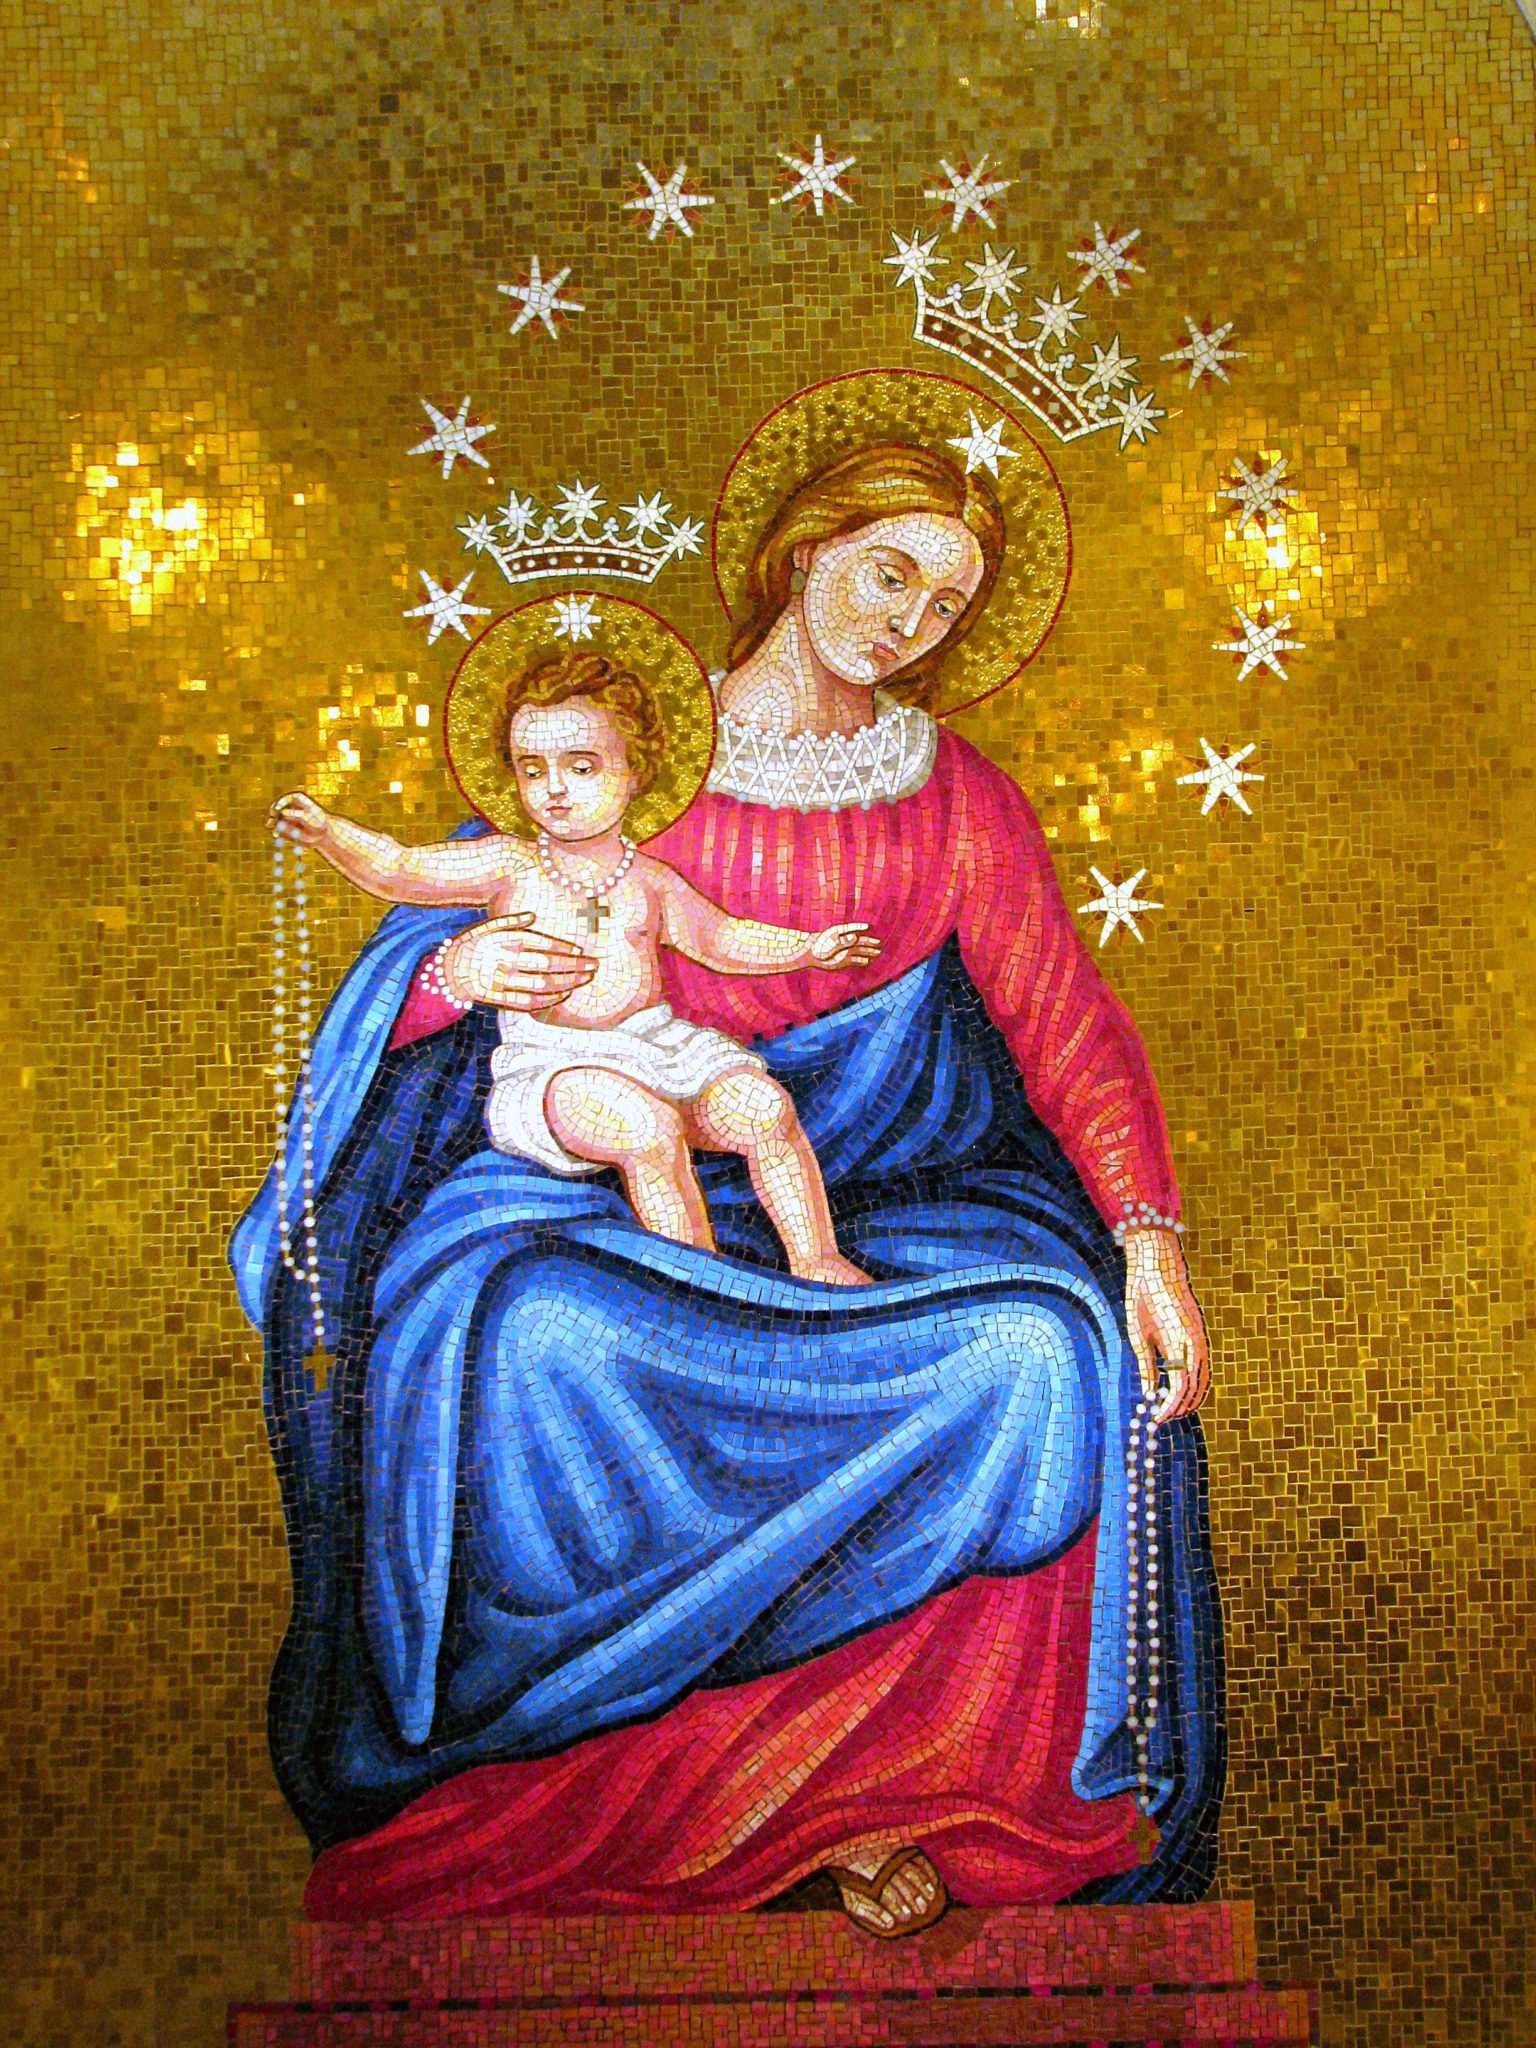 A mosaic depicting Mary and the Christ child at the Basilica of the National Shrine of the Immaculate Conception in Washington, D.C., the patronal church of the U.S. Beechwood Photography/Flickr.